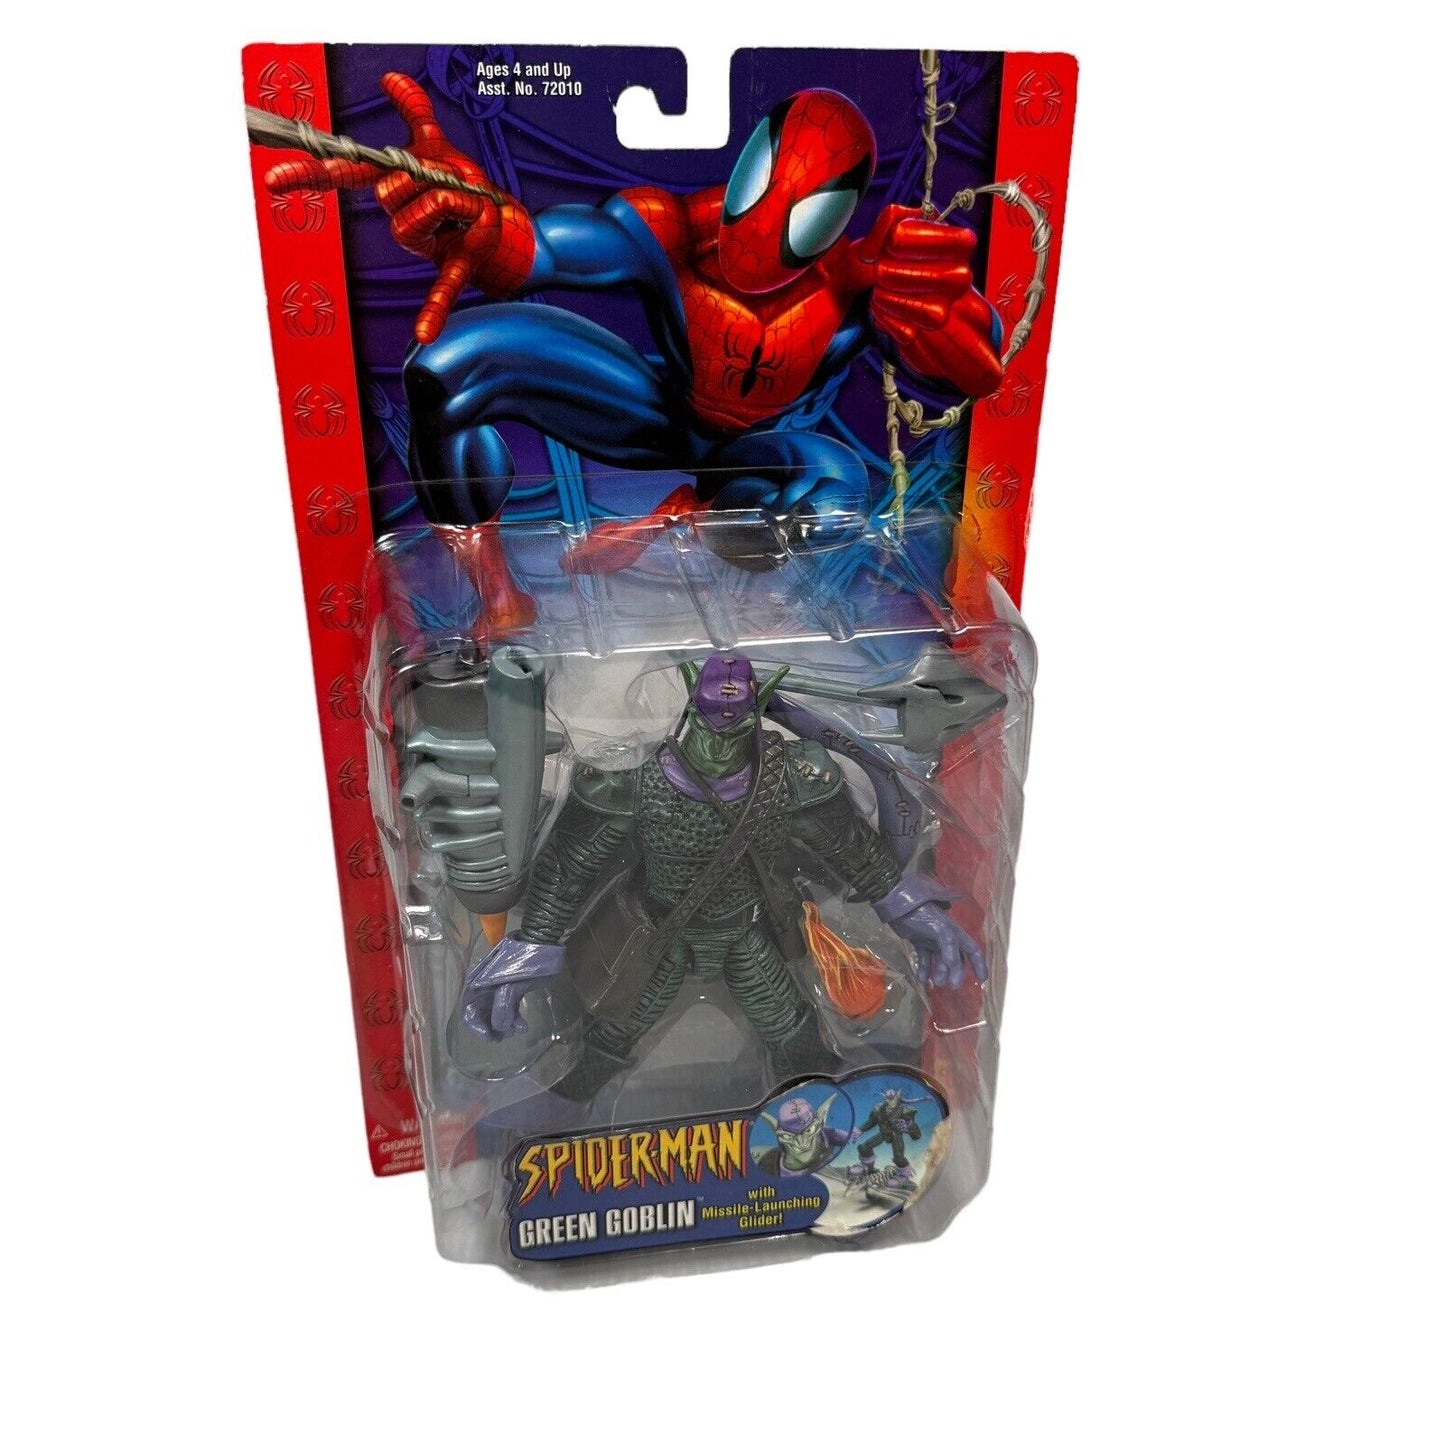 Marvel Entertainment Spider-man Green Goblin with Missle Launching Glider Action